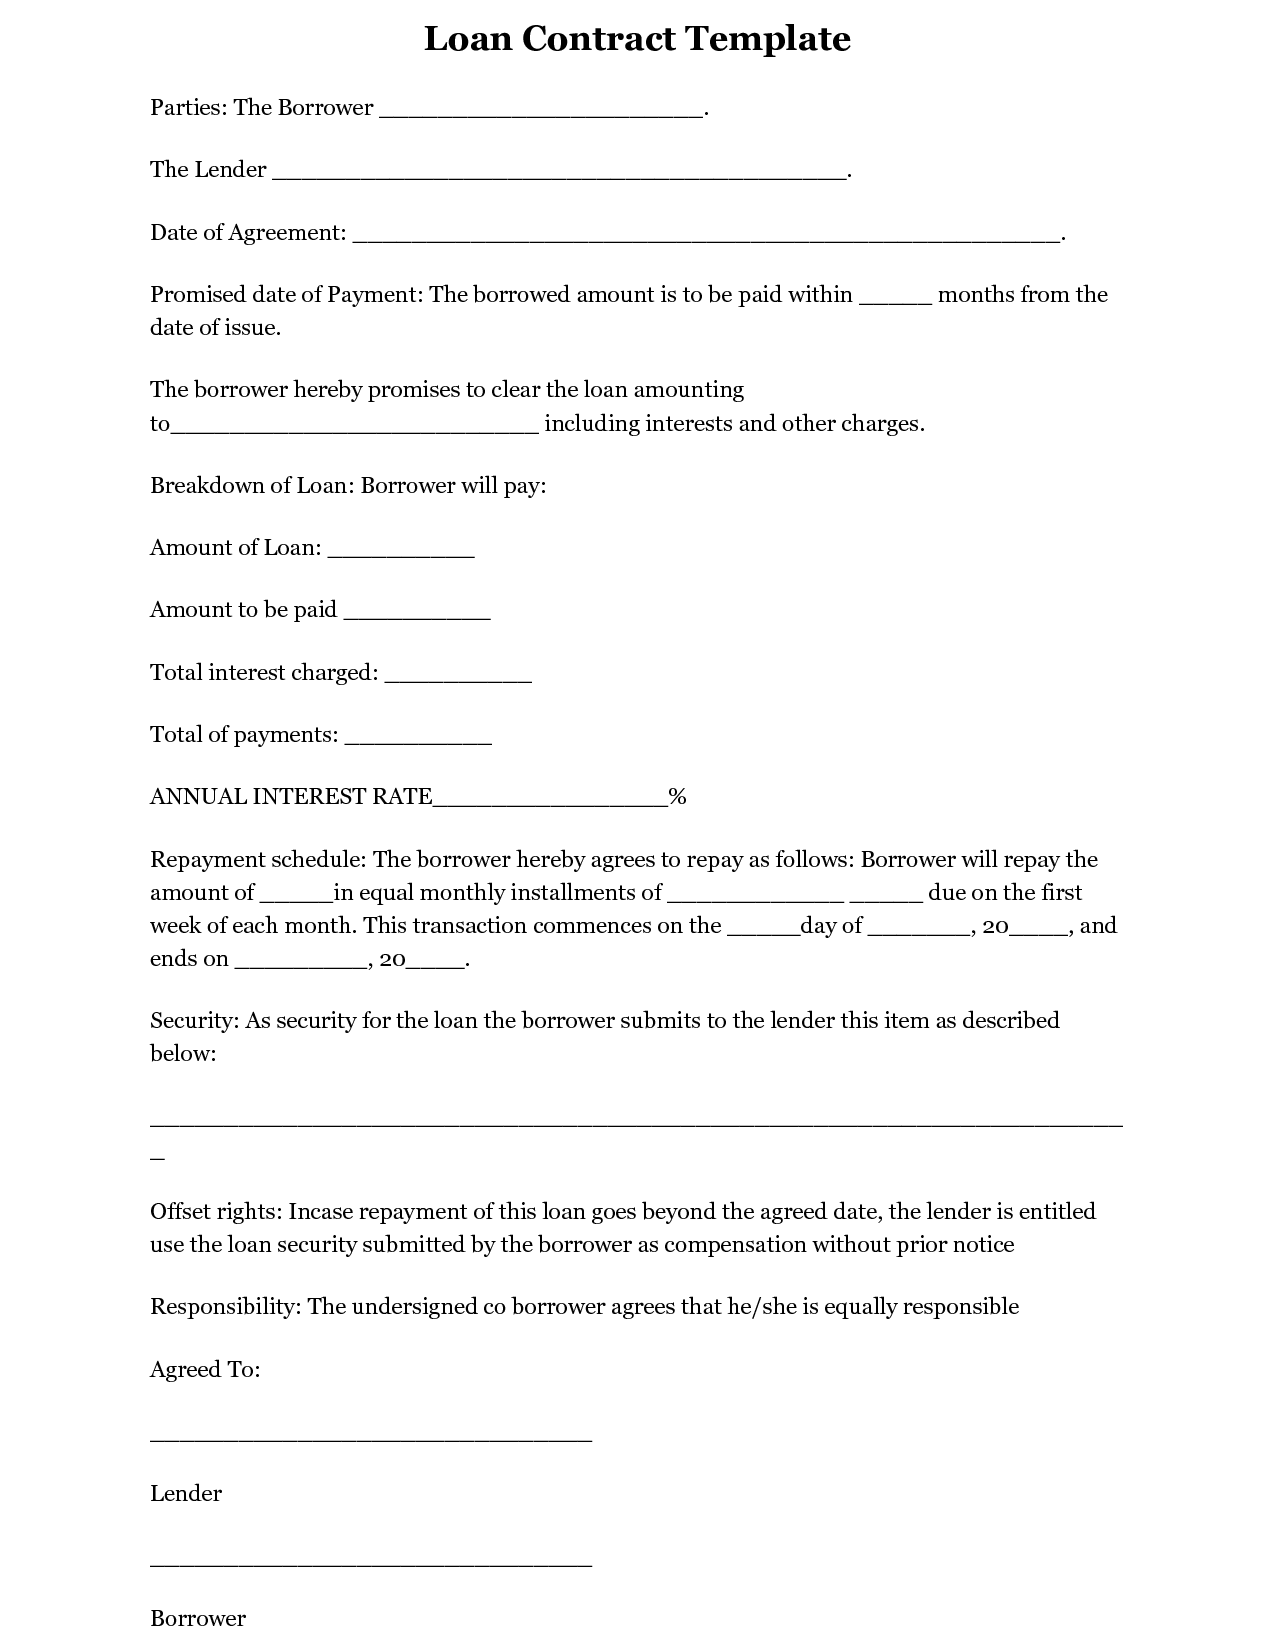 How To Write A Loan Contract Free Printable Documents